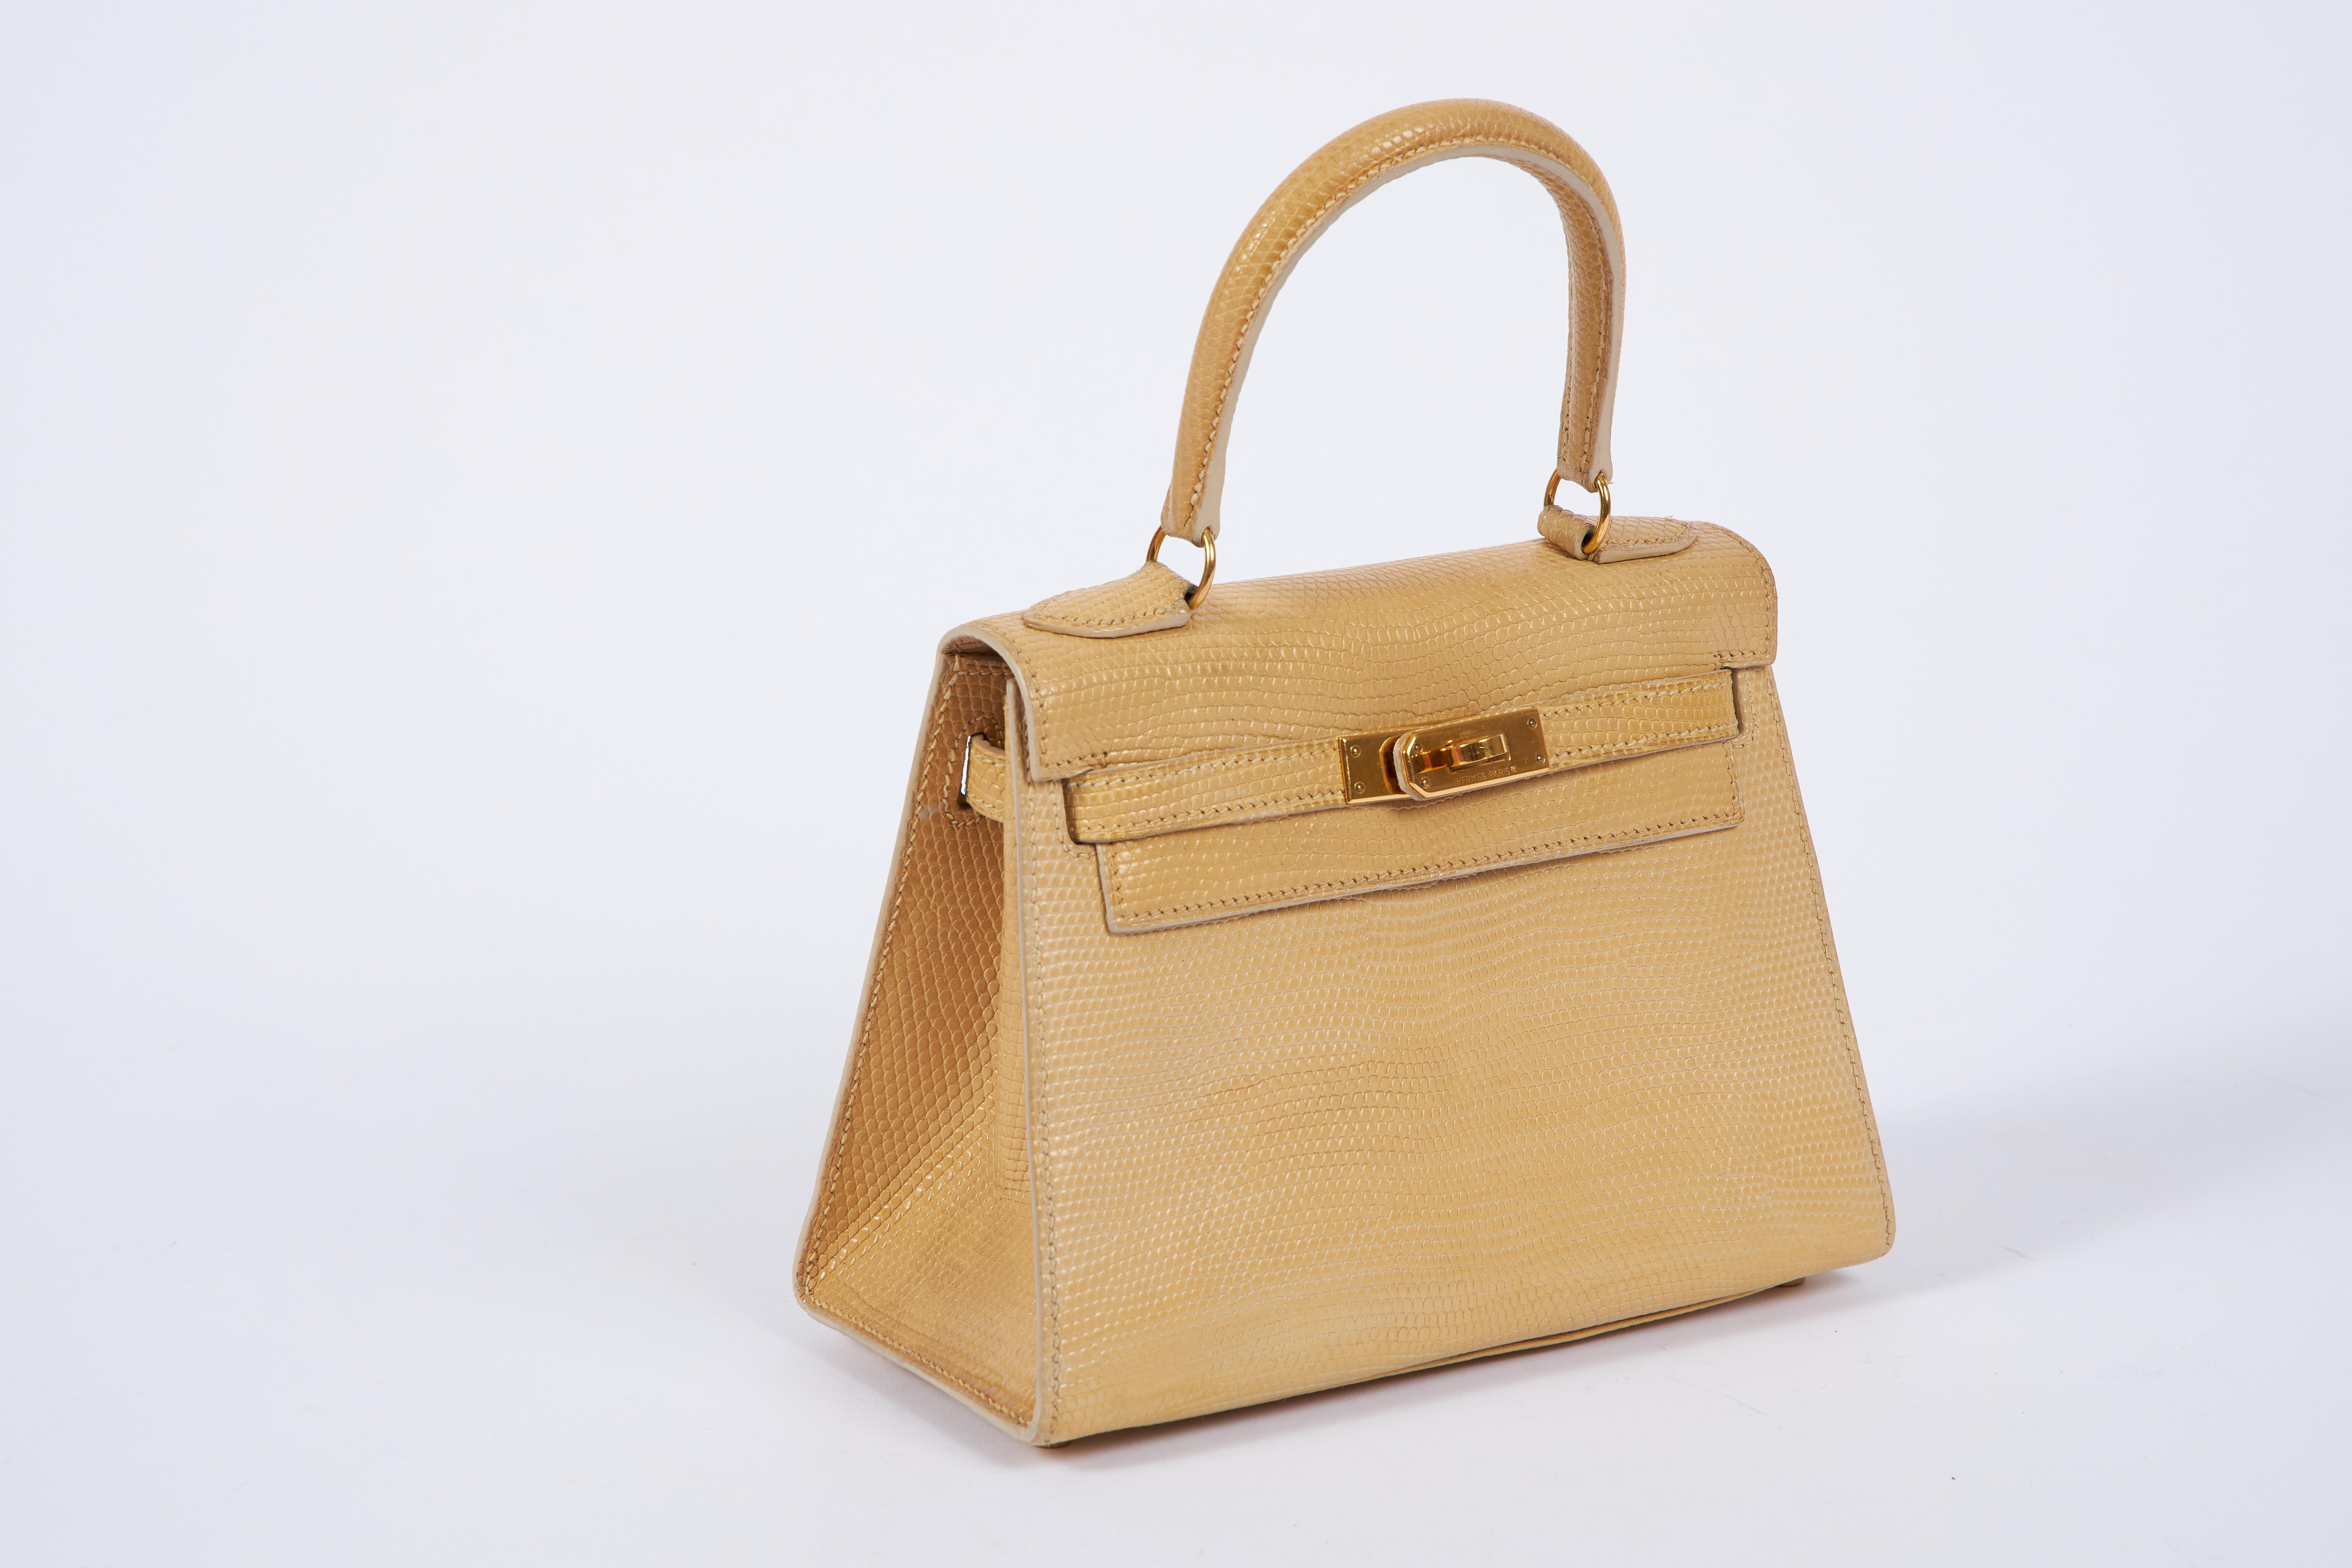 Hermès 20cm mini Kelly Sellier in jaune poussin lizard with goldtone hardware. Date stamp B for 1998. Comes with original dust cover and box.